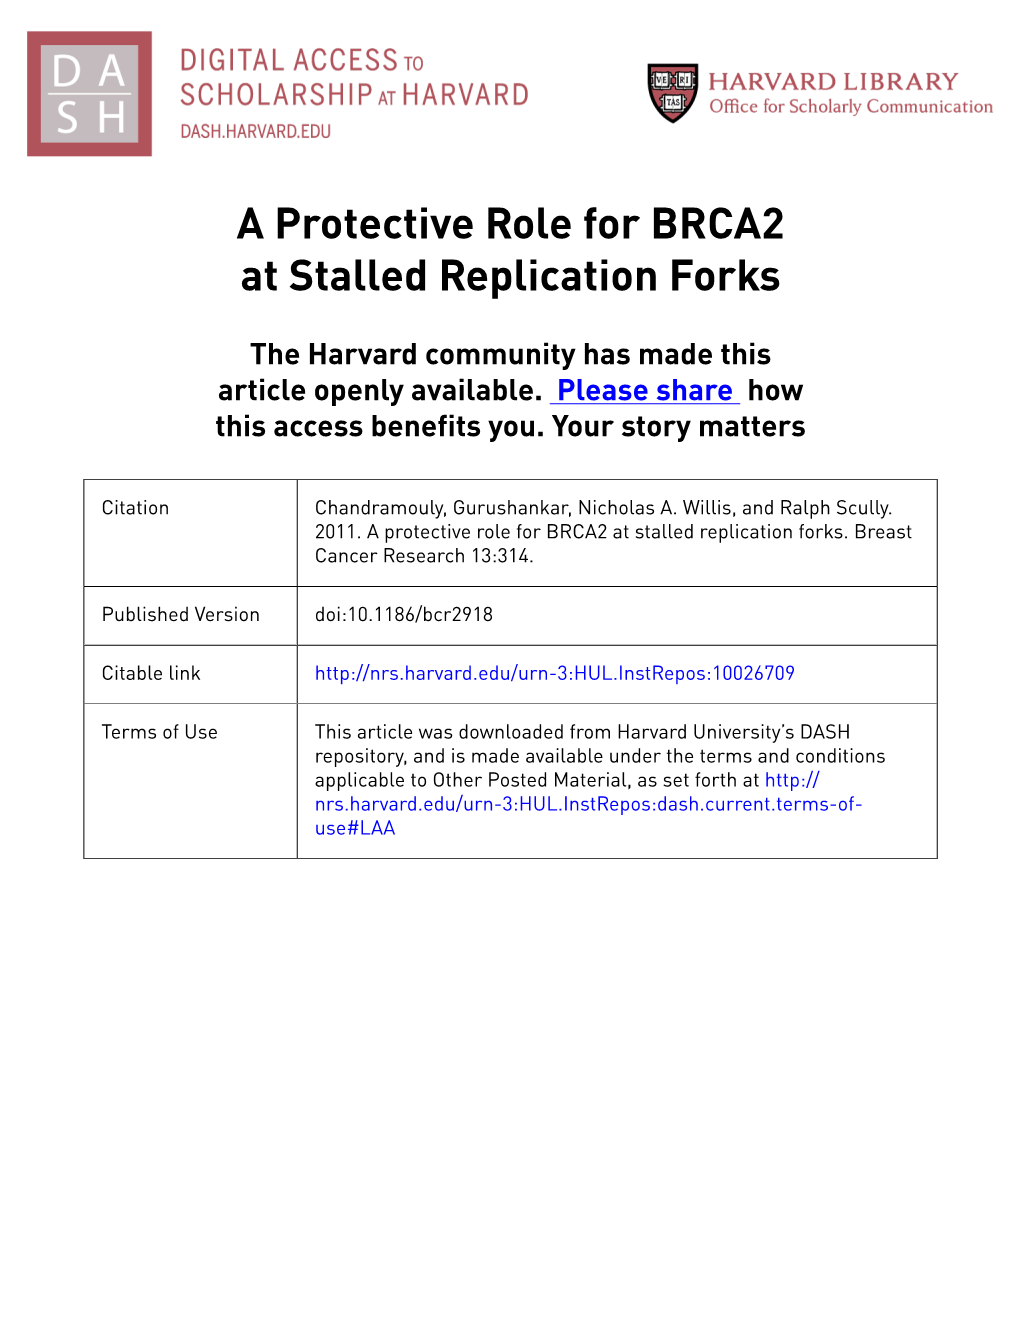 A Protective Role for BRCA2 at Stalled Replication Forks